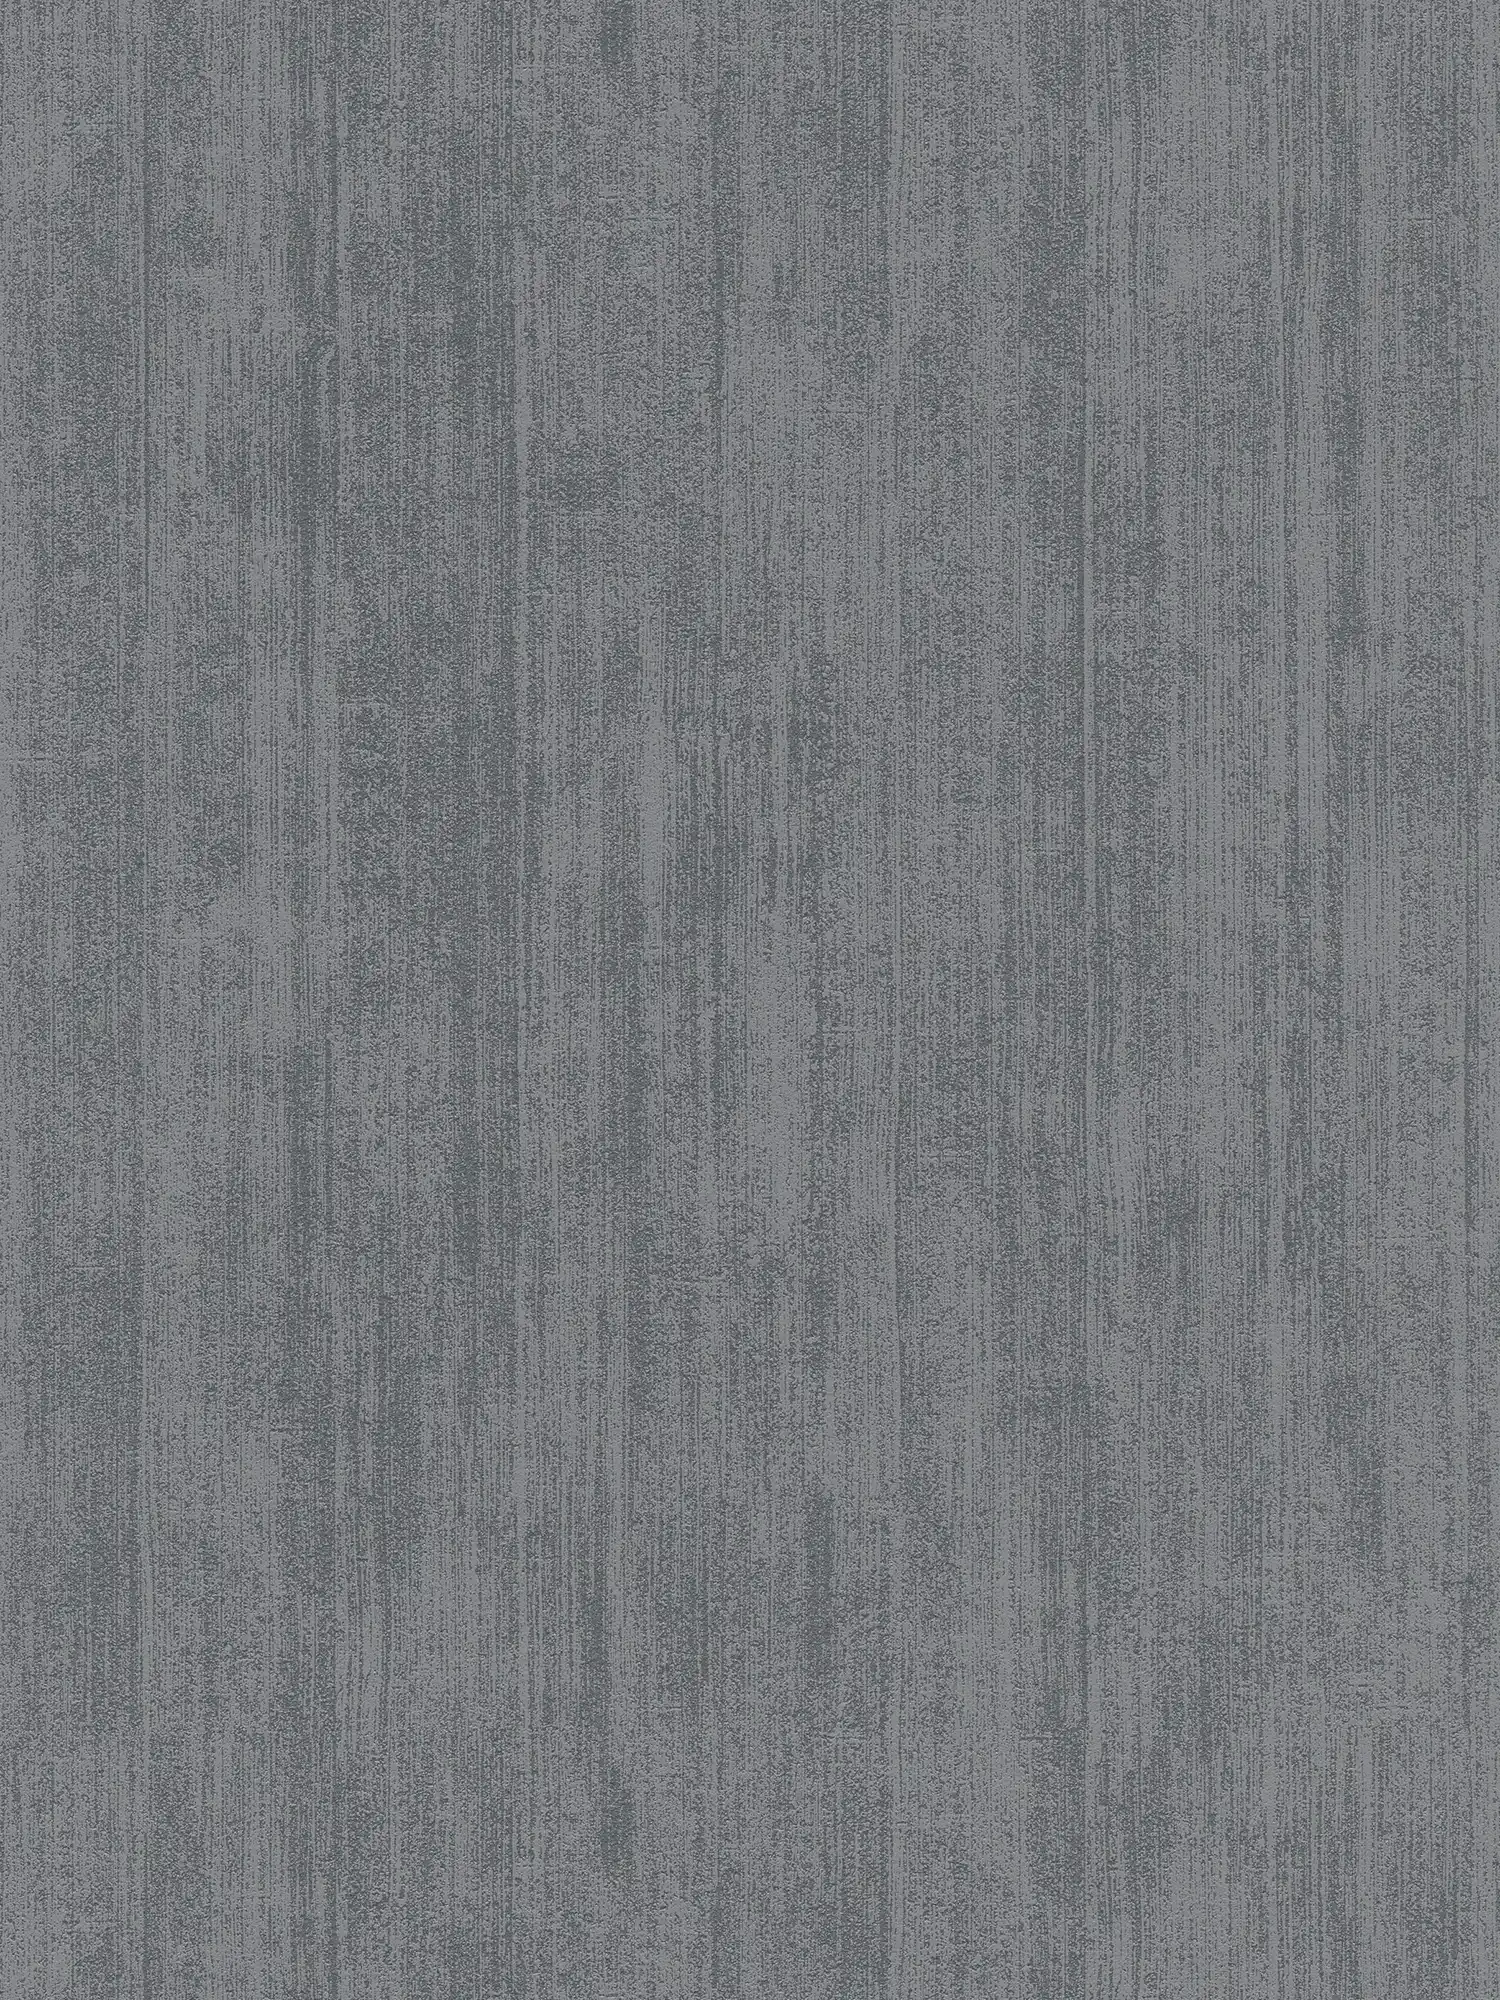 Plain non-woven wallpaper with tone-on-tone hatching - black
